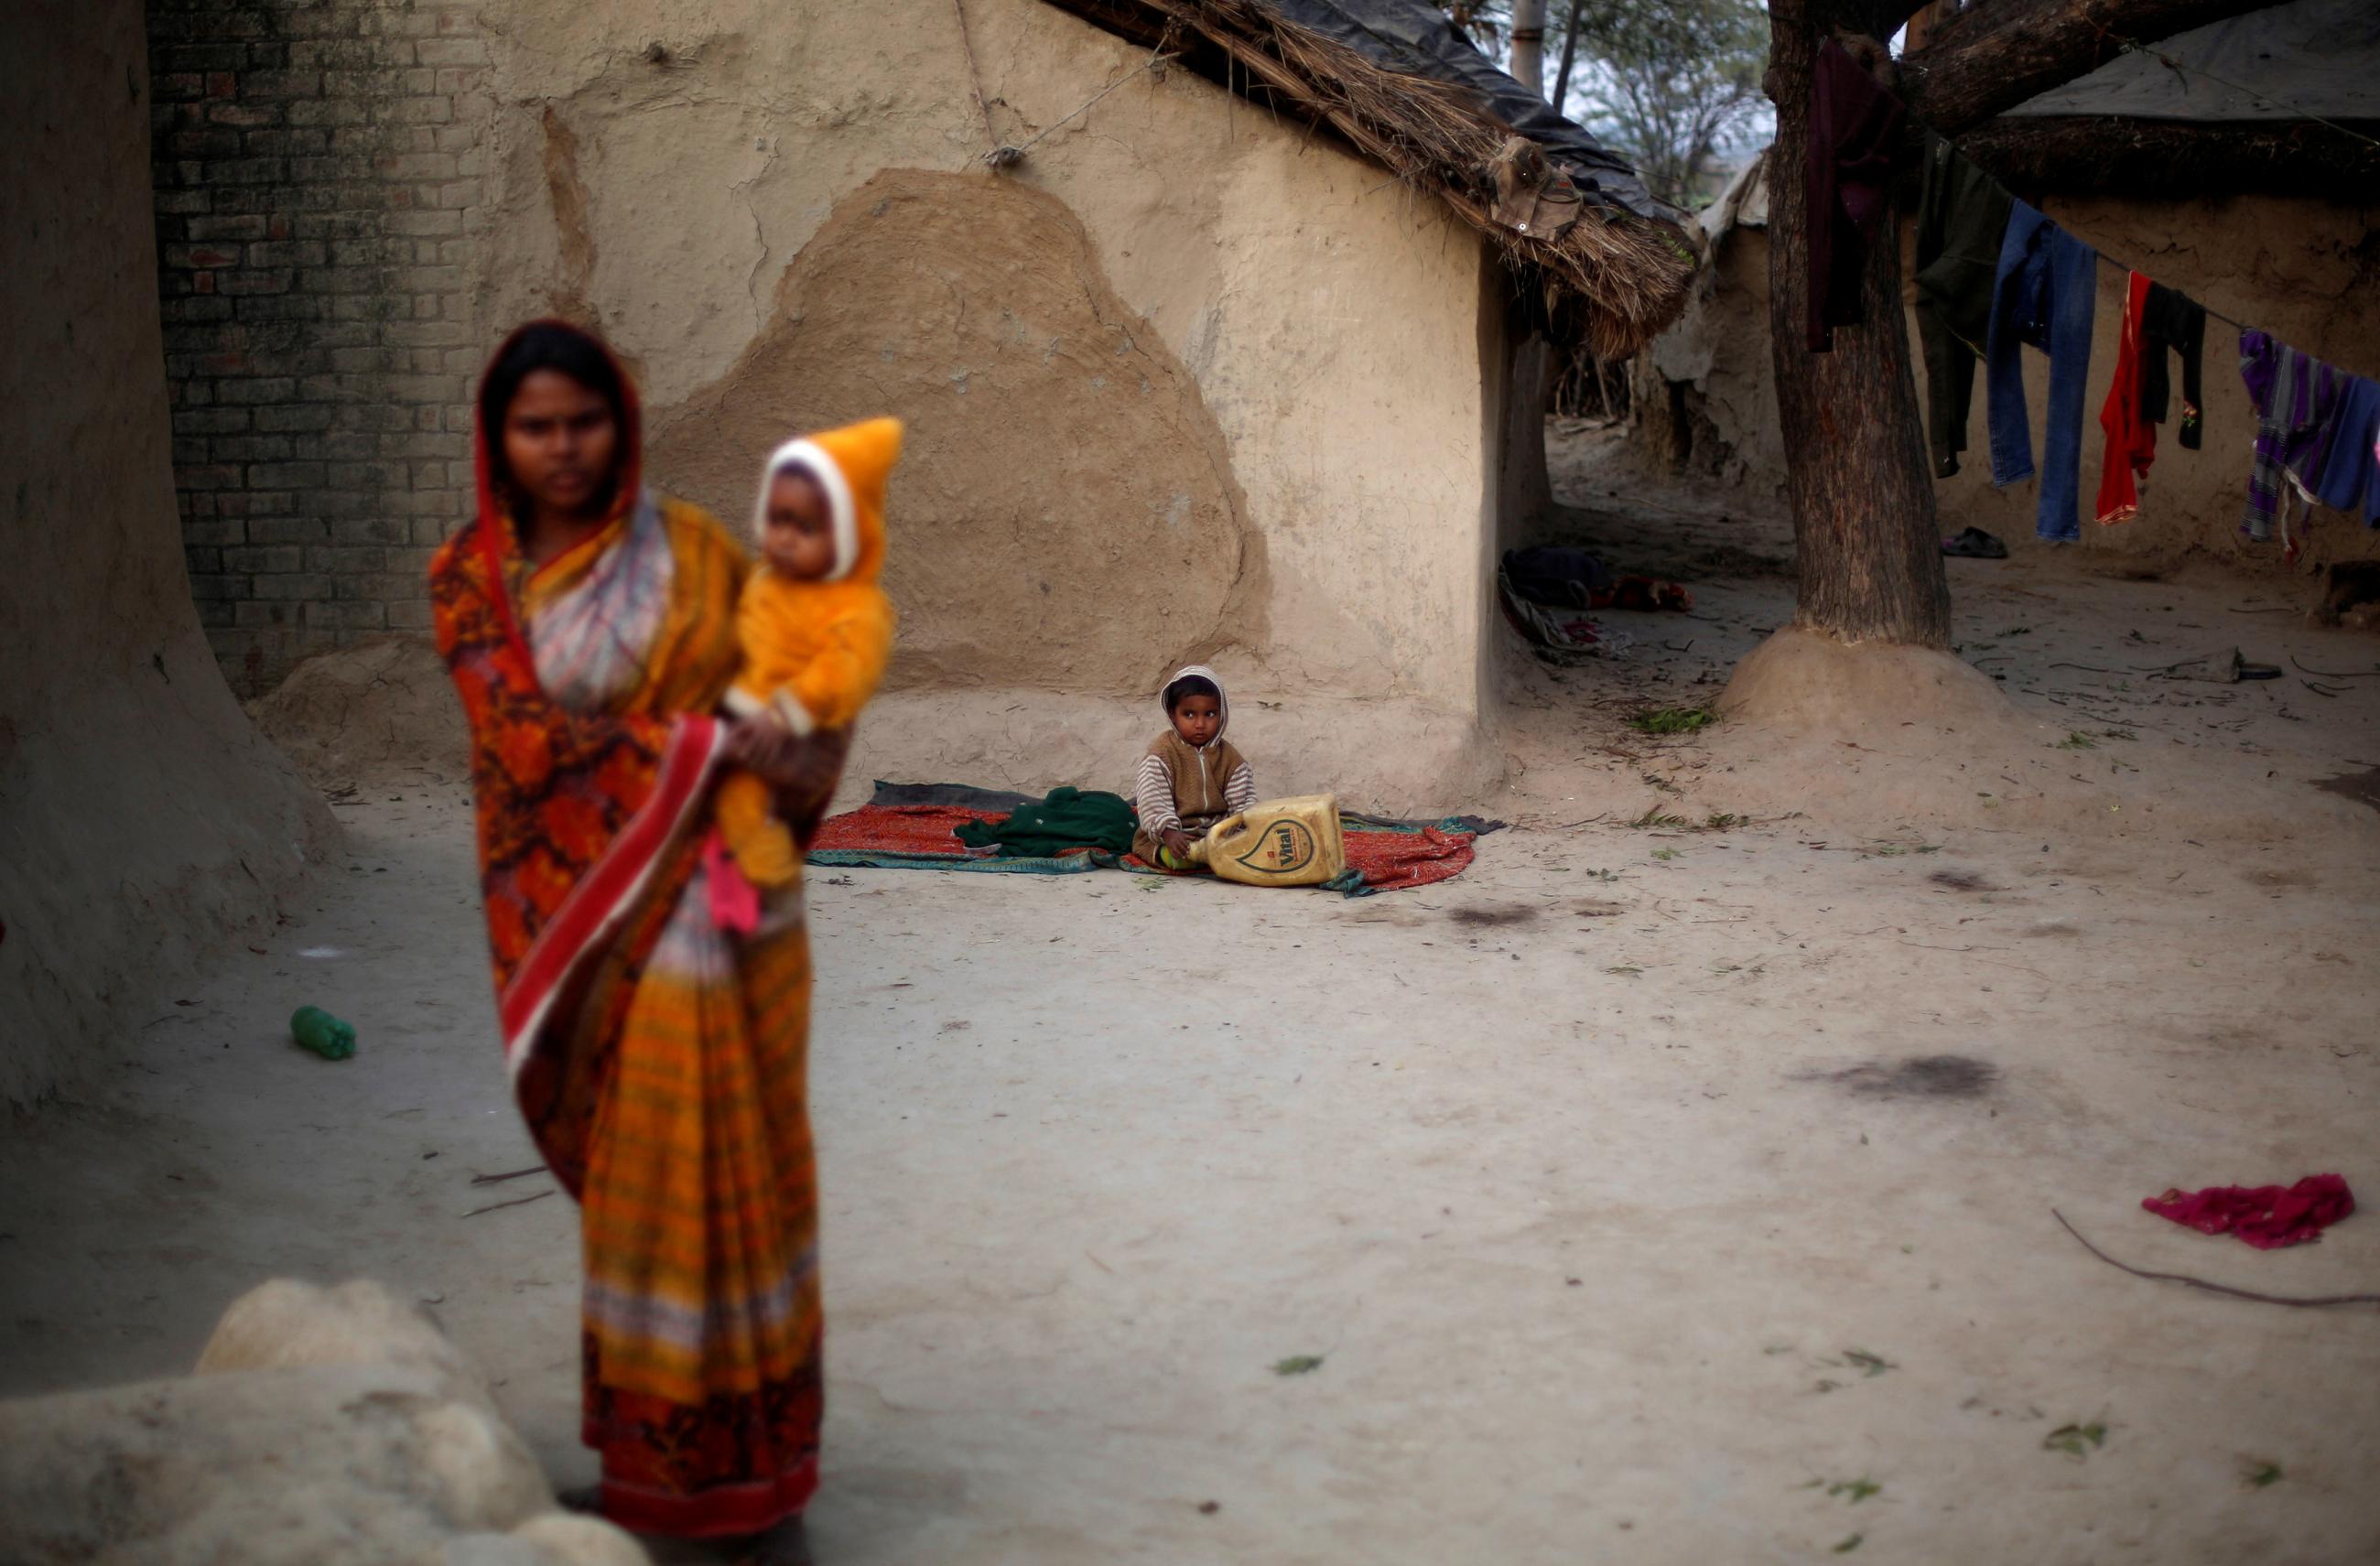 A wife of a snake charmer holds her baby as she stands outside her house in Jogi Dera, Baghpur, Uttar Pradesh, India, on January 16, 2017.